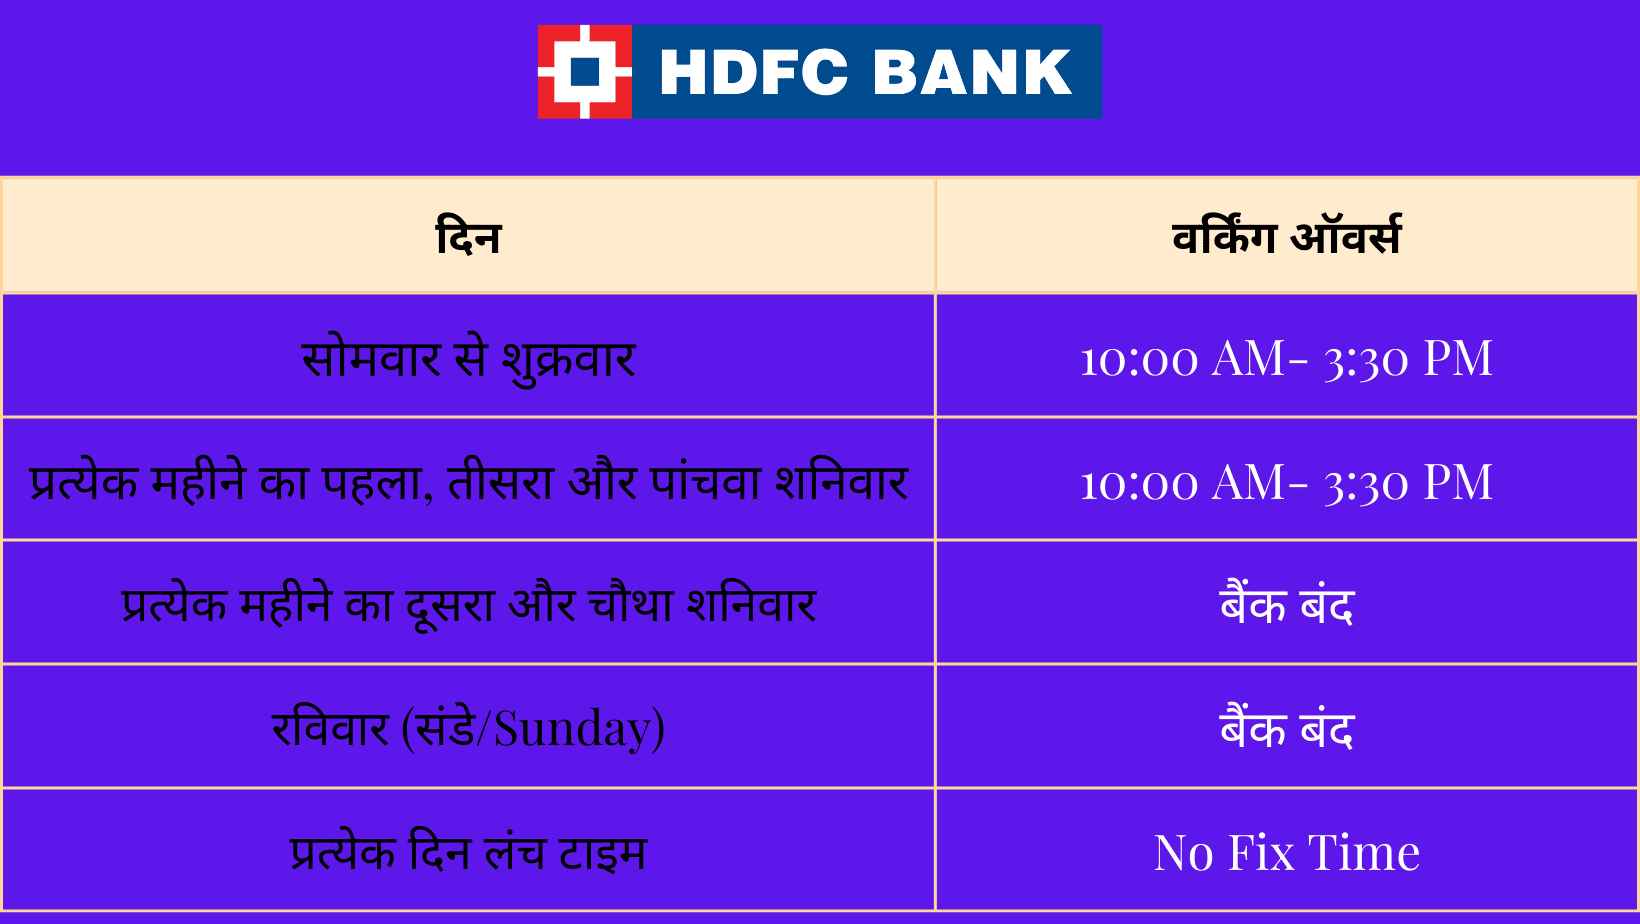 hdfc bank timings today